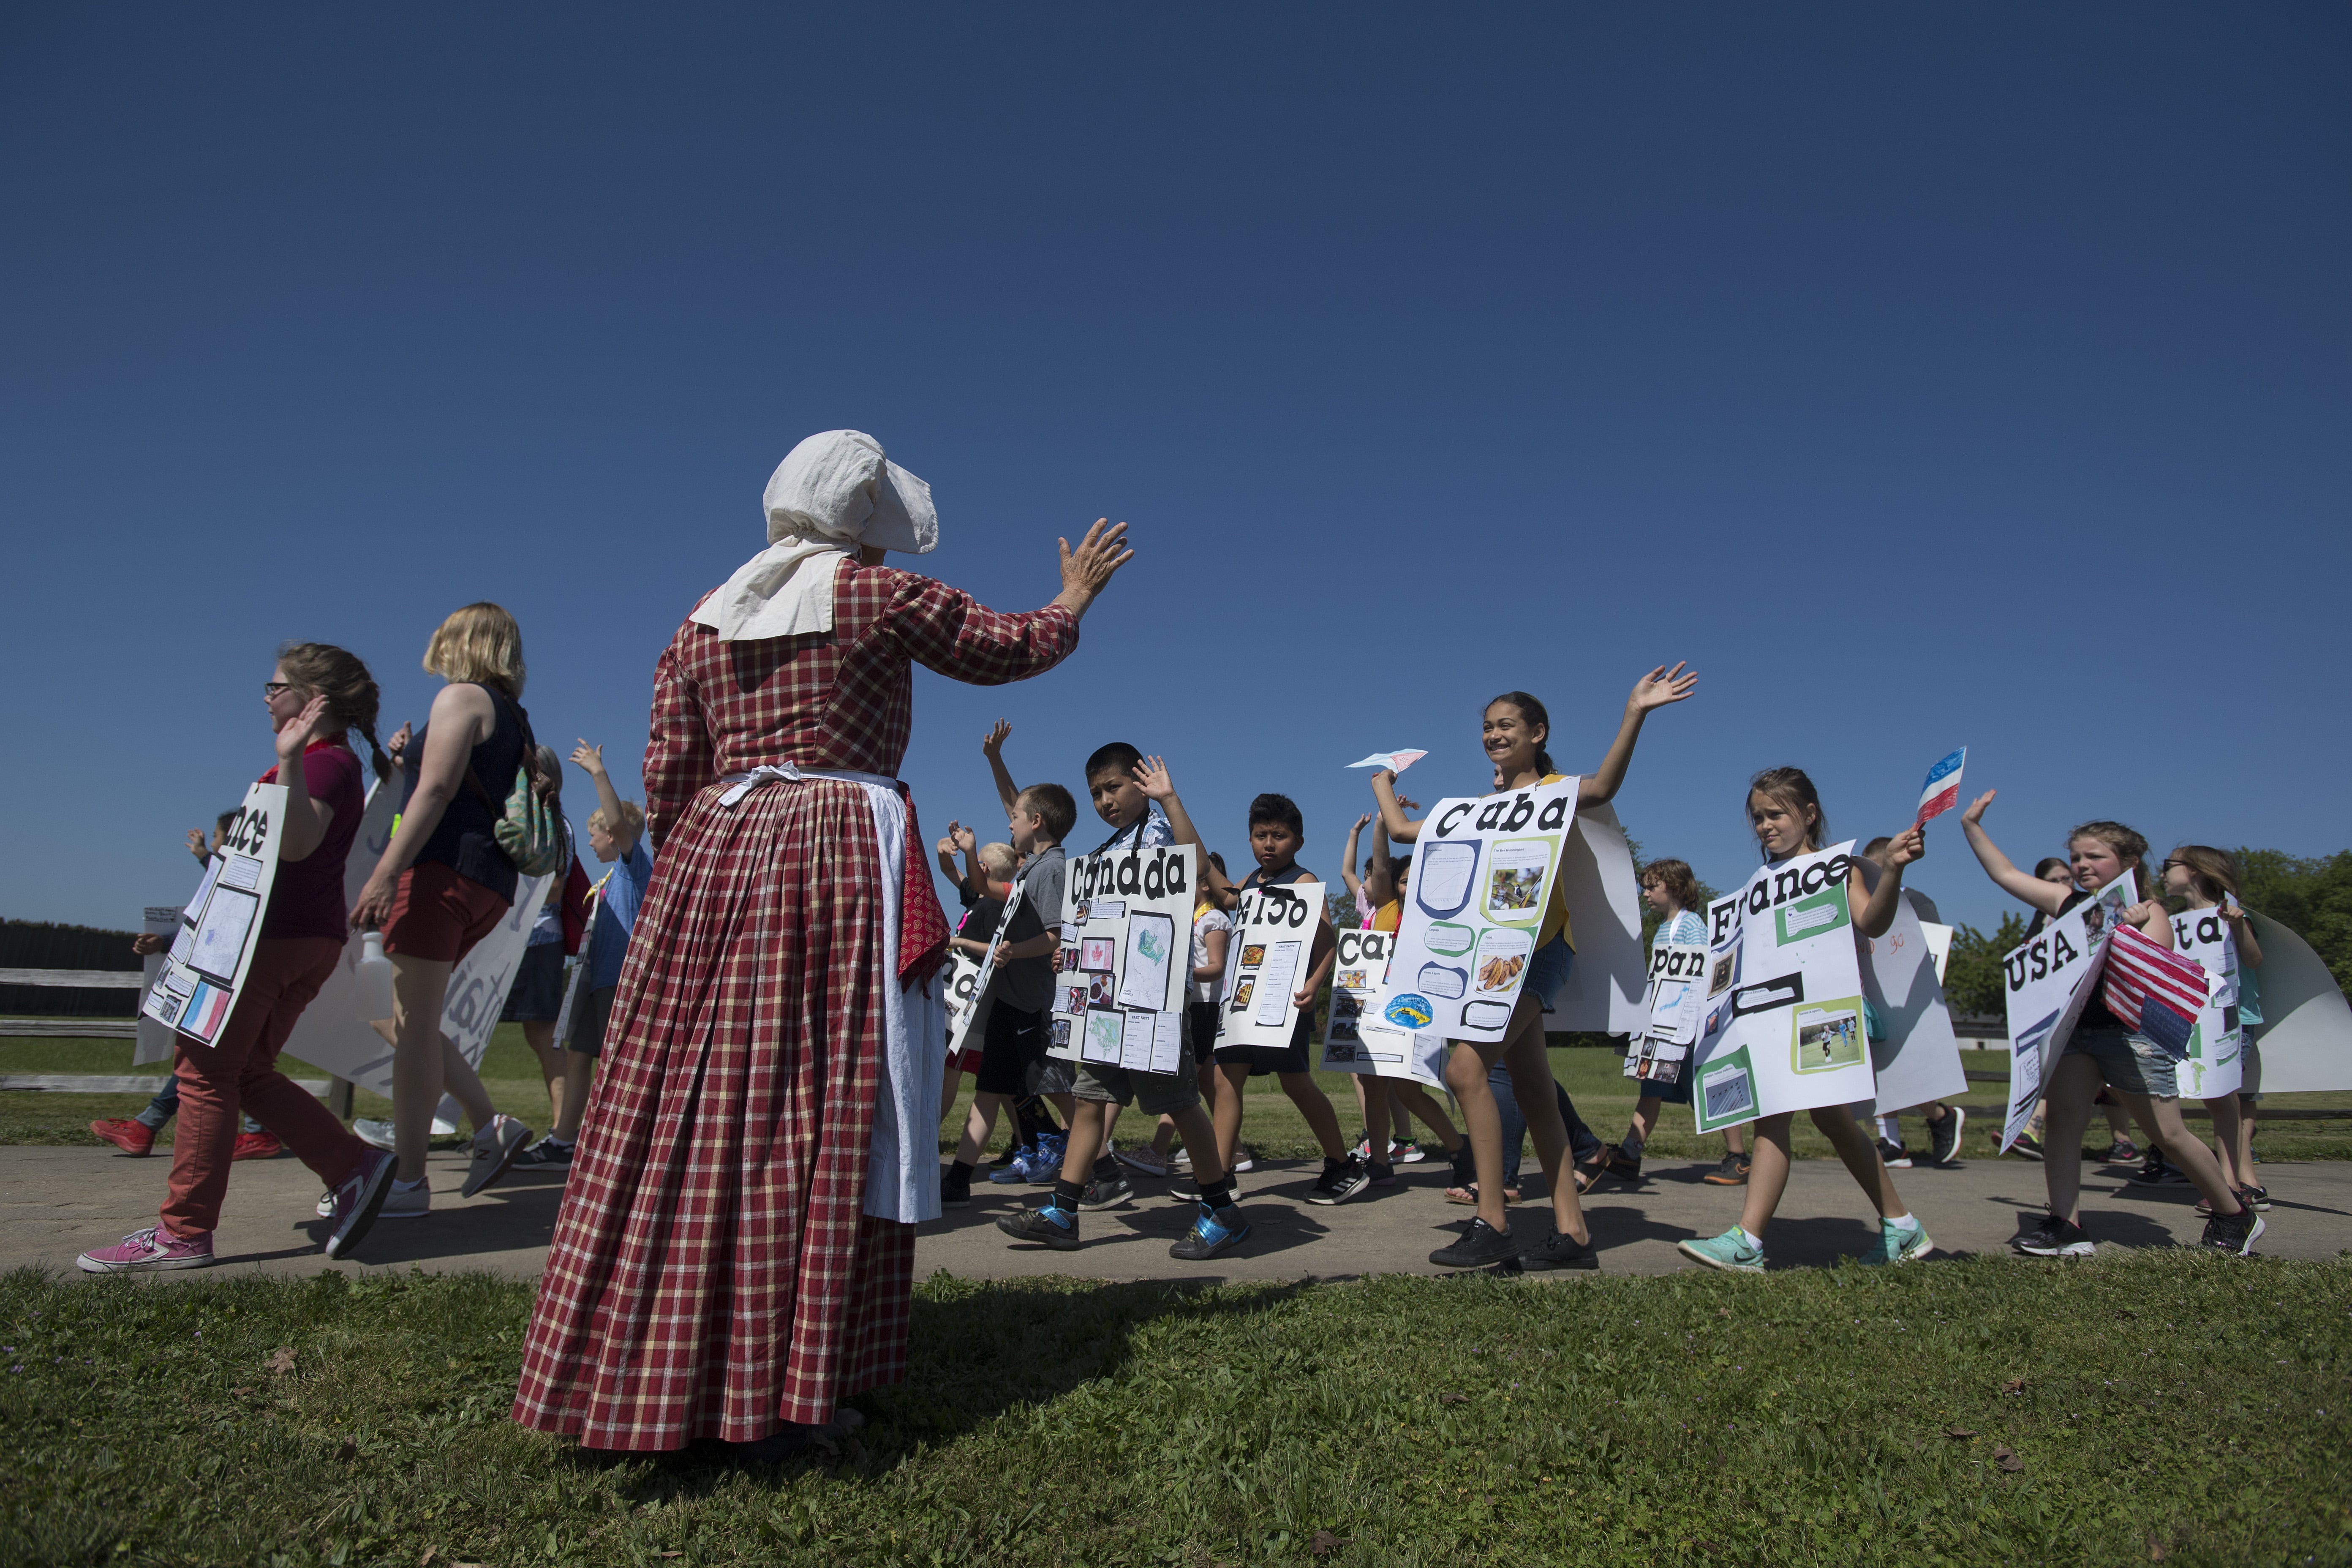 Fort Vancouver National Historic Site volunteer Becky Hudak, in plaid, dressed as a Metis from 1845, gives a warm welcome to students taking part in the annual Children's Cultural Parade as they prepare to enter the stockade Friday morning, May 10, 2019. Over 1,500 third grade students celebrated learning, community and diversity as they marched through the parade route and ended at the stockade with a speech by Gov. Jay Inslee.